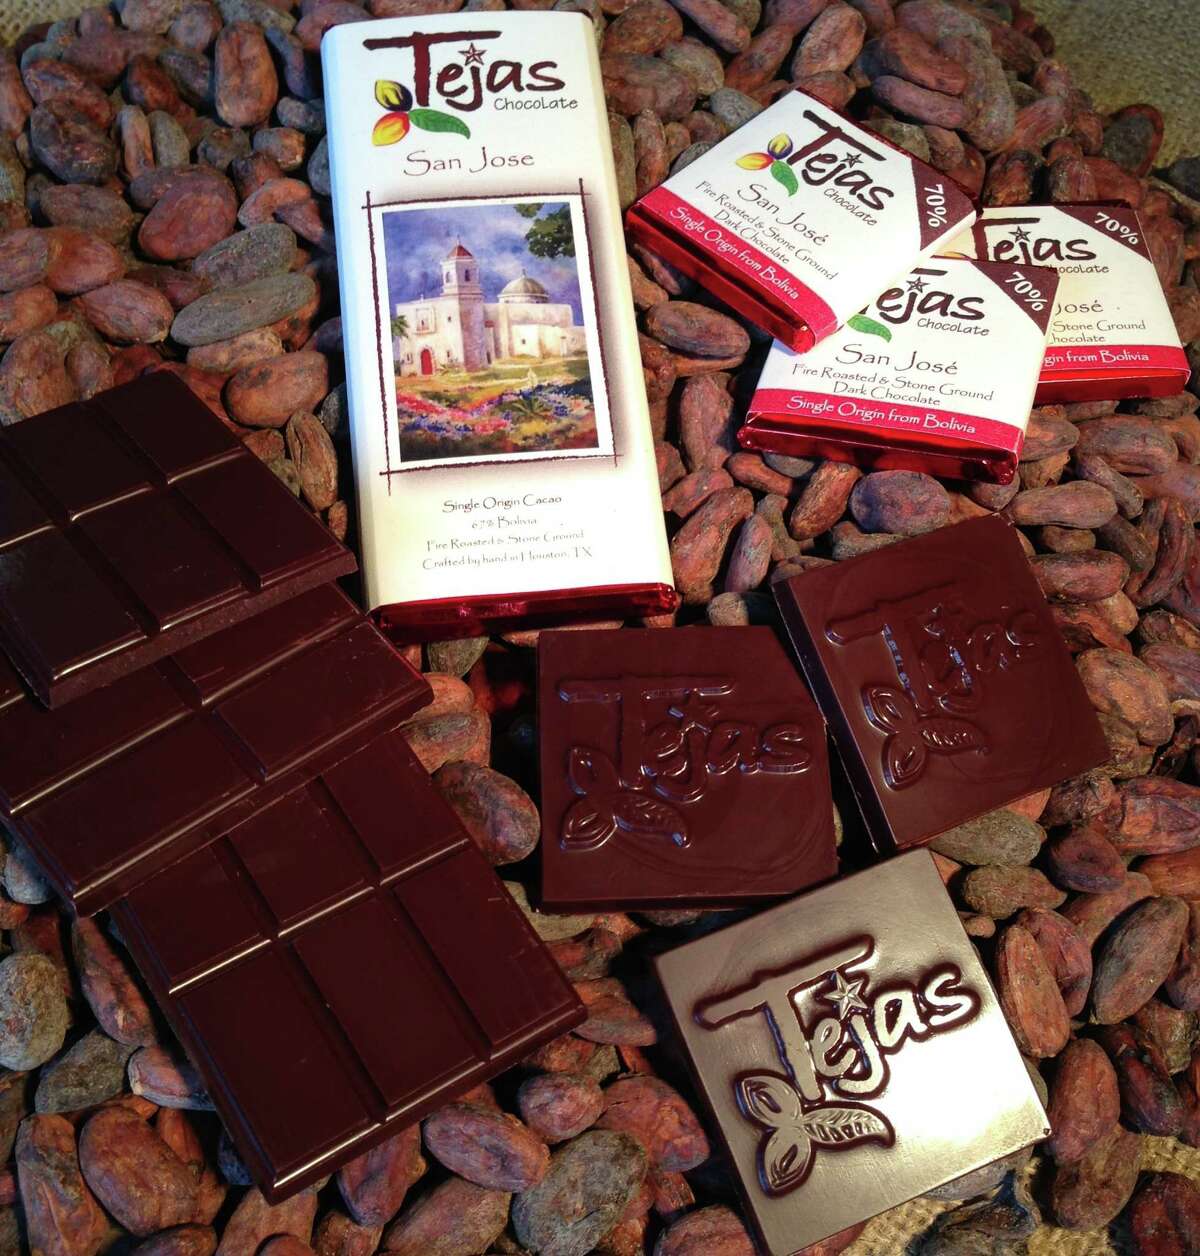 Tejas Chocolates are made in Spring, TX. "We hand craft chocolate using only premium cocoa beans sourced from cacao farms around the world. Our method is uniquely Texan and inspired by traditional artisan chocolate makers. "